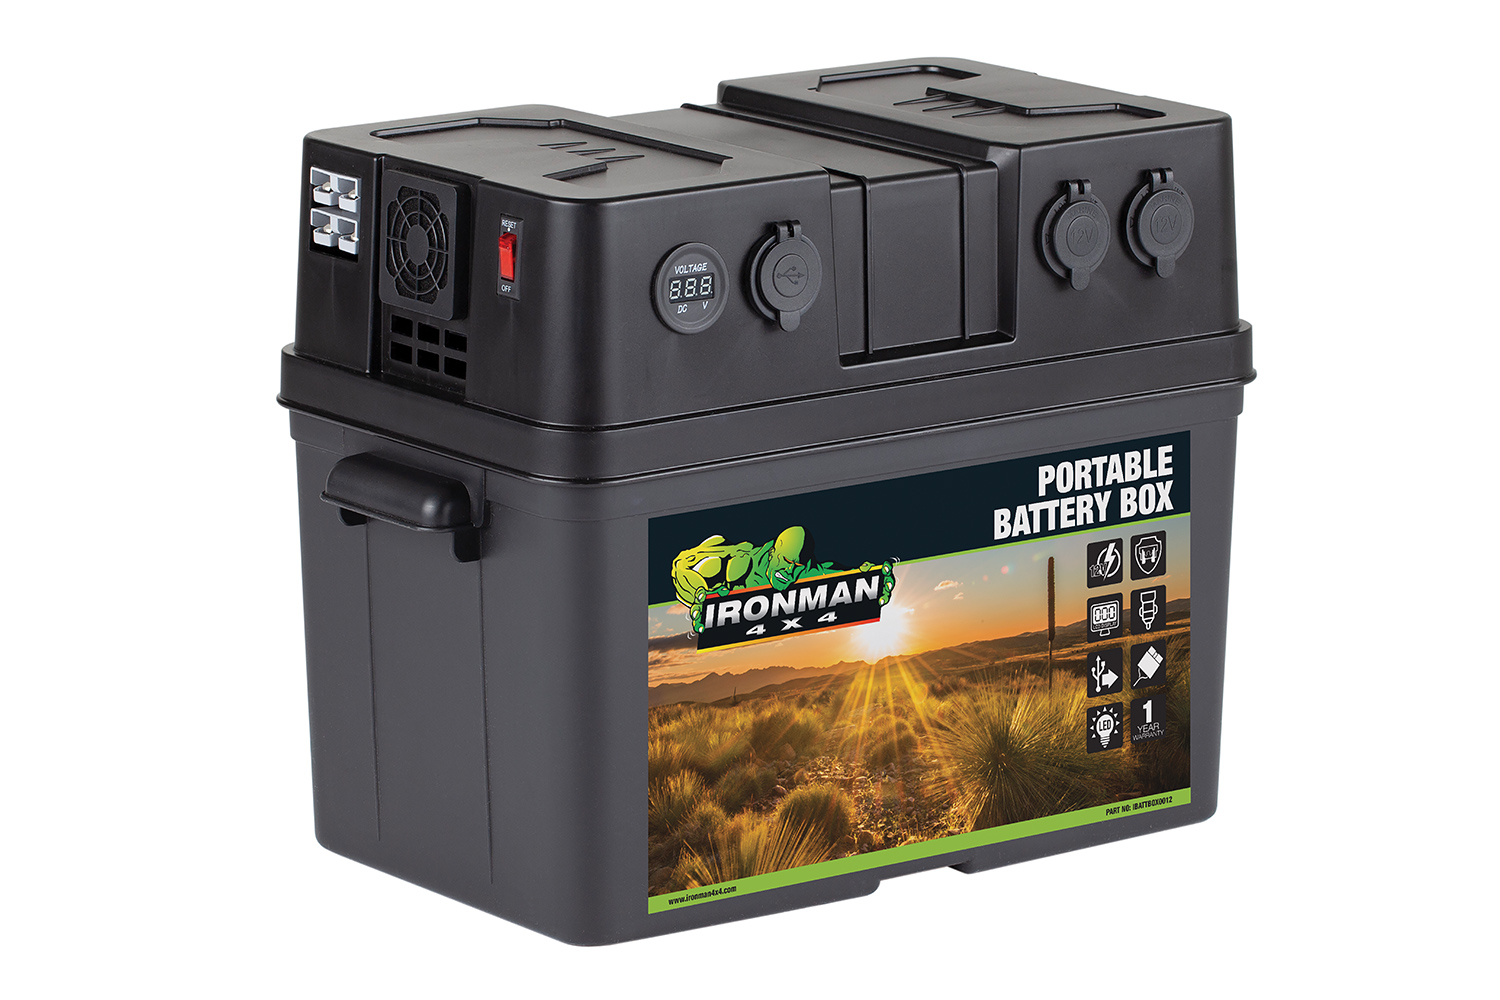 What batteries are compatible with battery box?